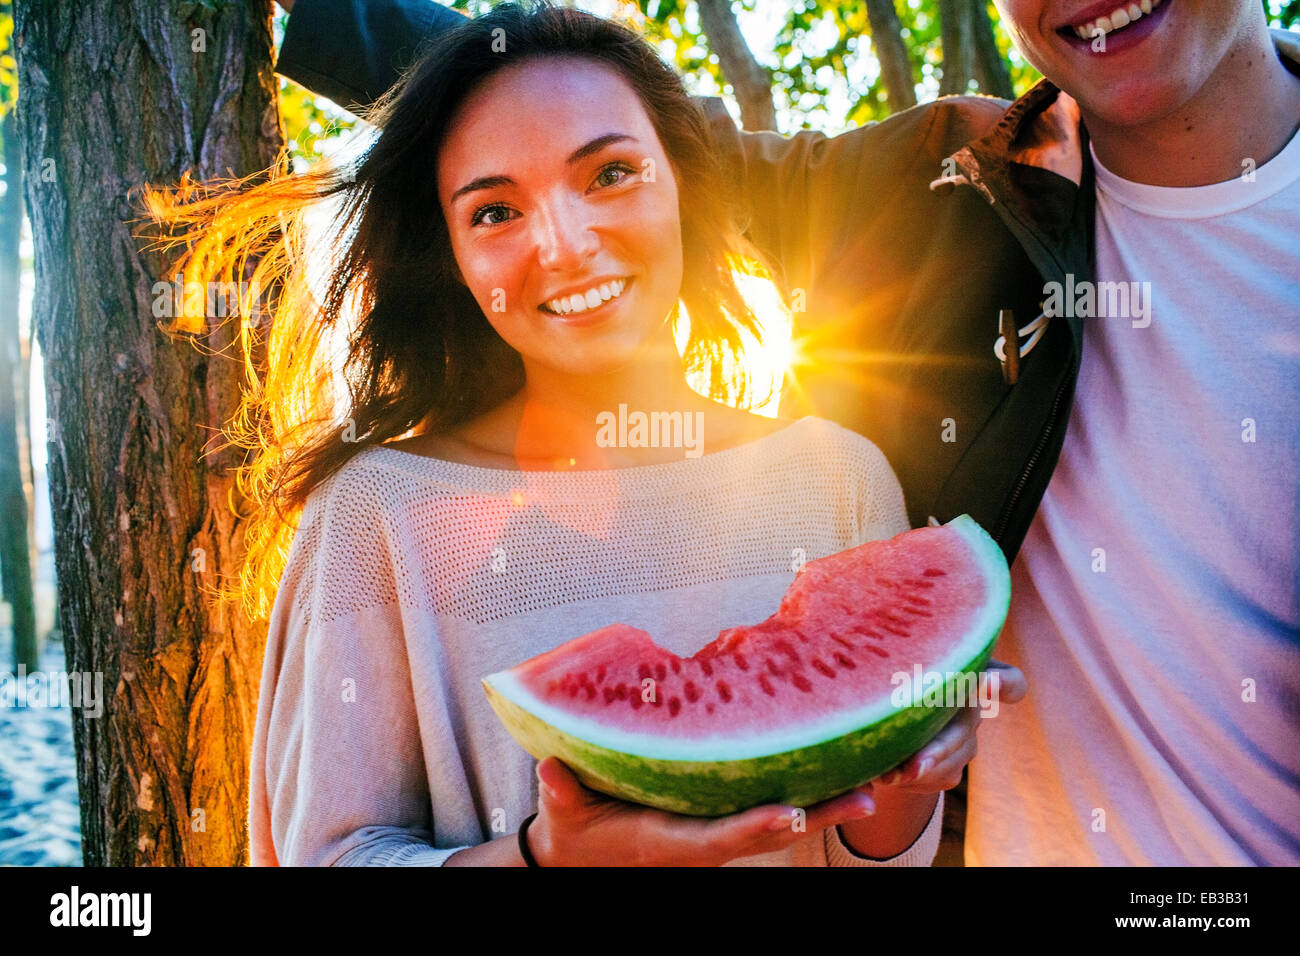 Caucasian couple eating watermelon at sunset Banque D'Images